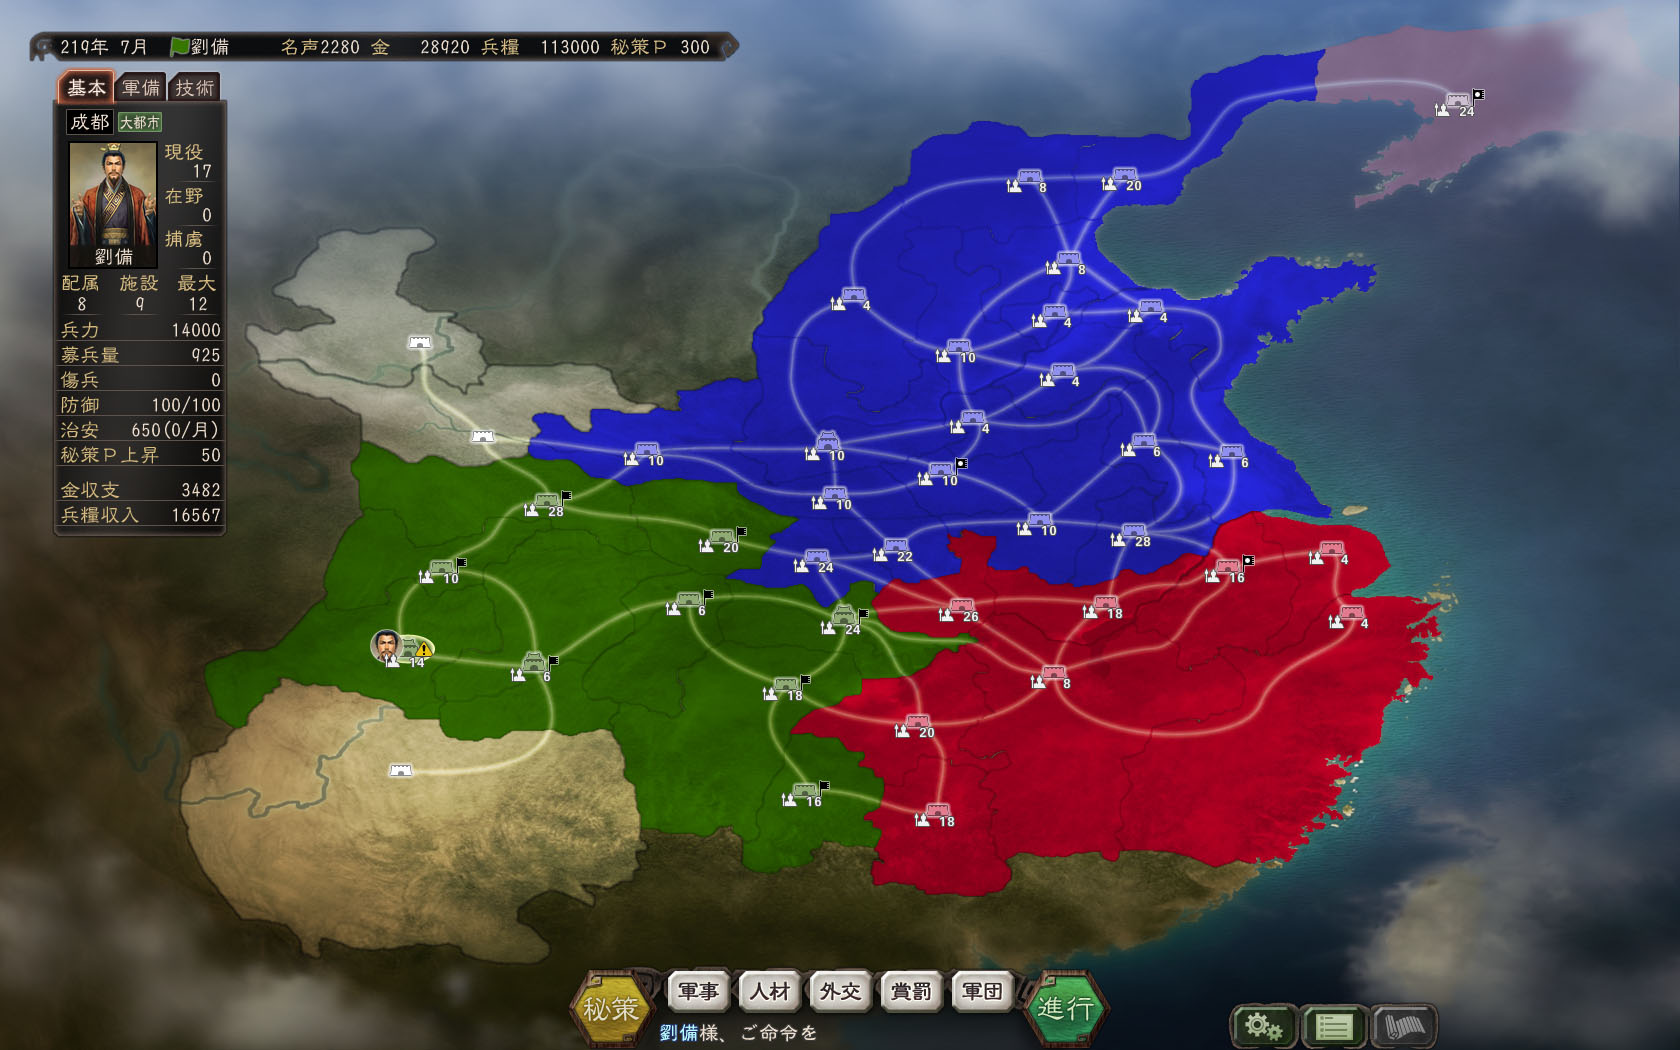 Romance of the Three Kingdoms XII with Power Up Kit screenshot